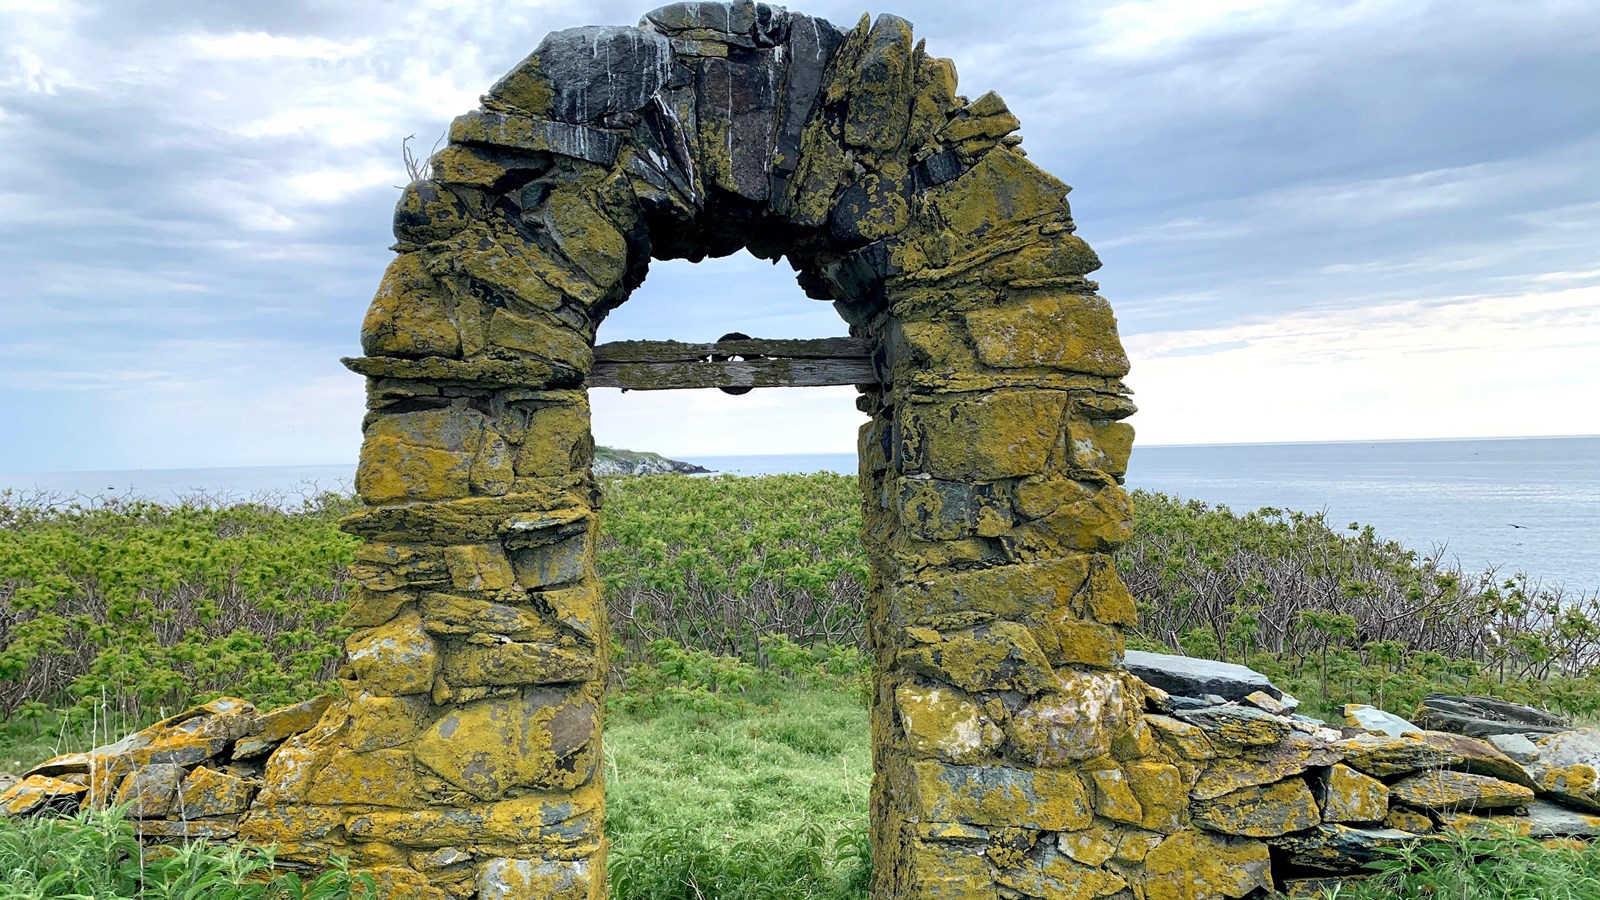 stone archway still present on the island. Both greenery and the water is seen in the background. 